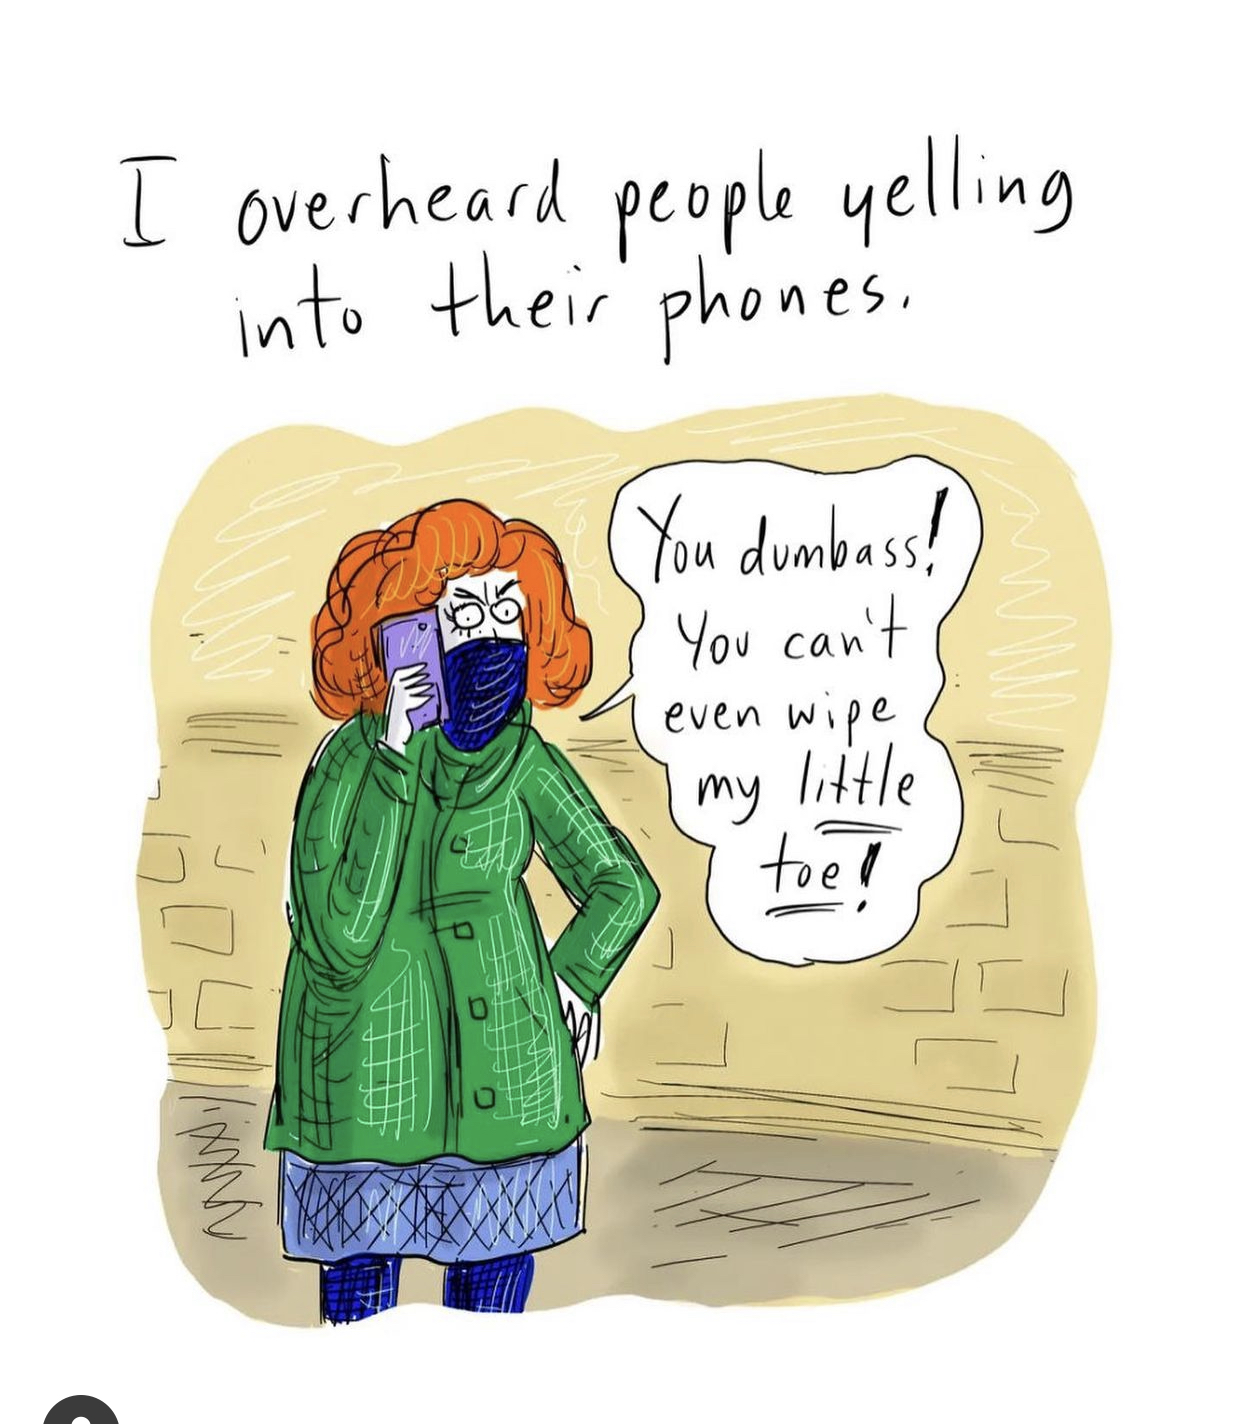 A New Yorker cartoon where red-headed broad is yelling into the phone "You dumbass, you can't even wipe my little toe!"